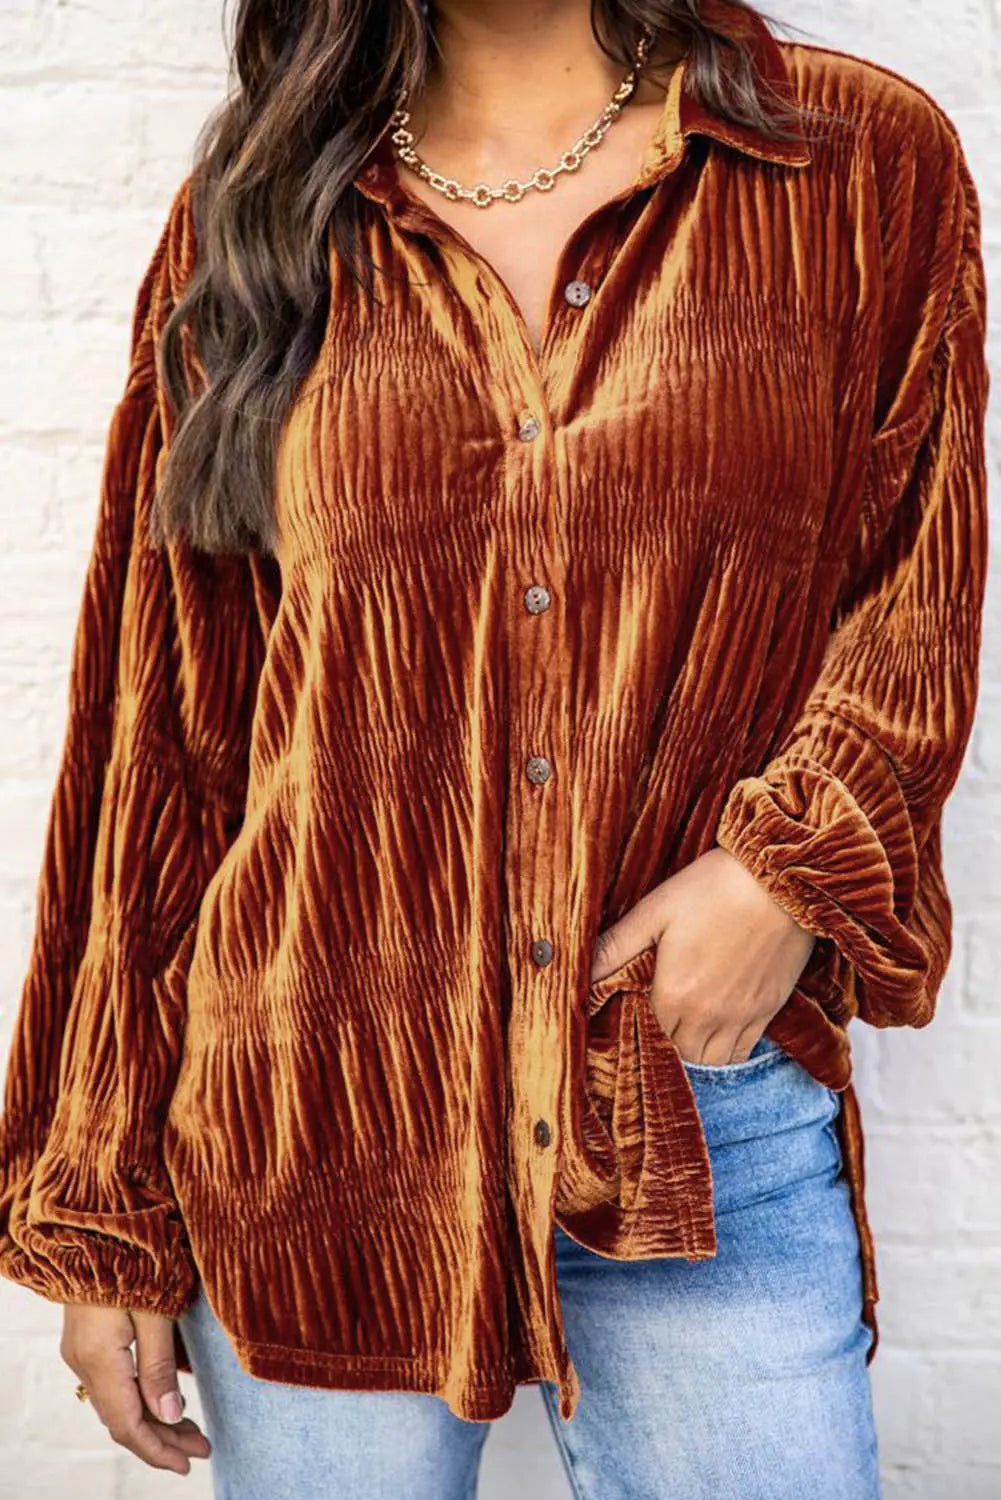 Brown solid color textured velvet button up shirt - s / 95% polyester + 5% elastane - blouses & shirts